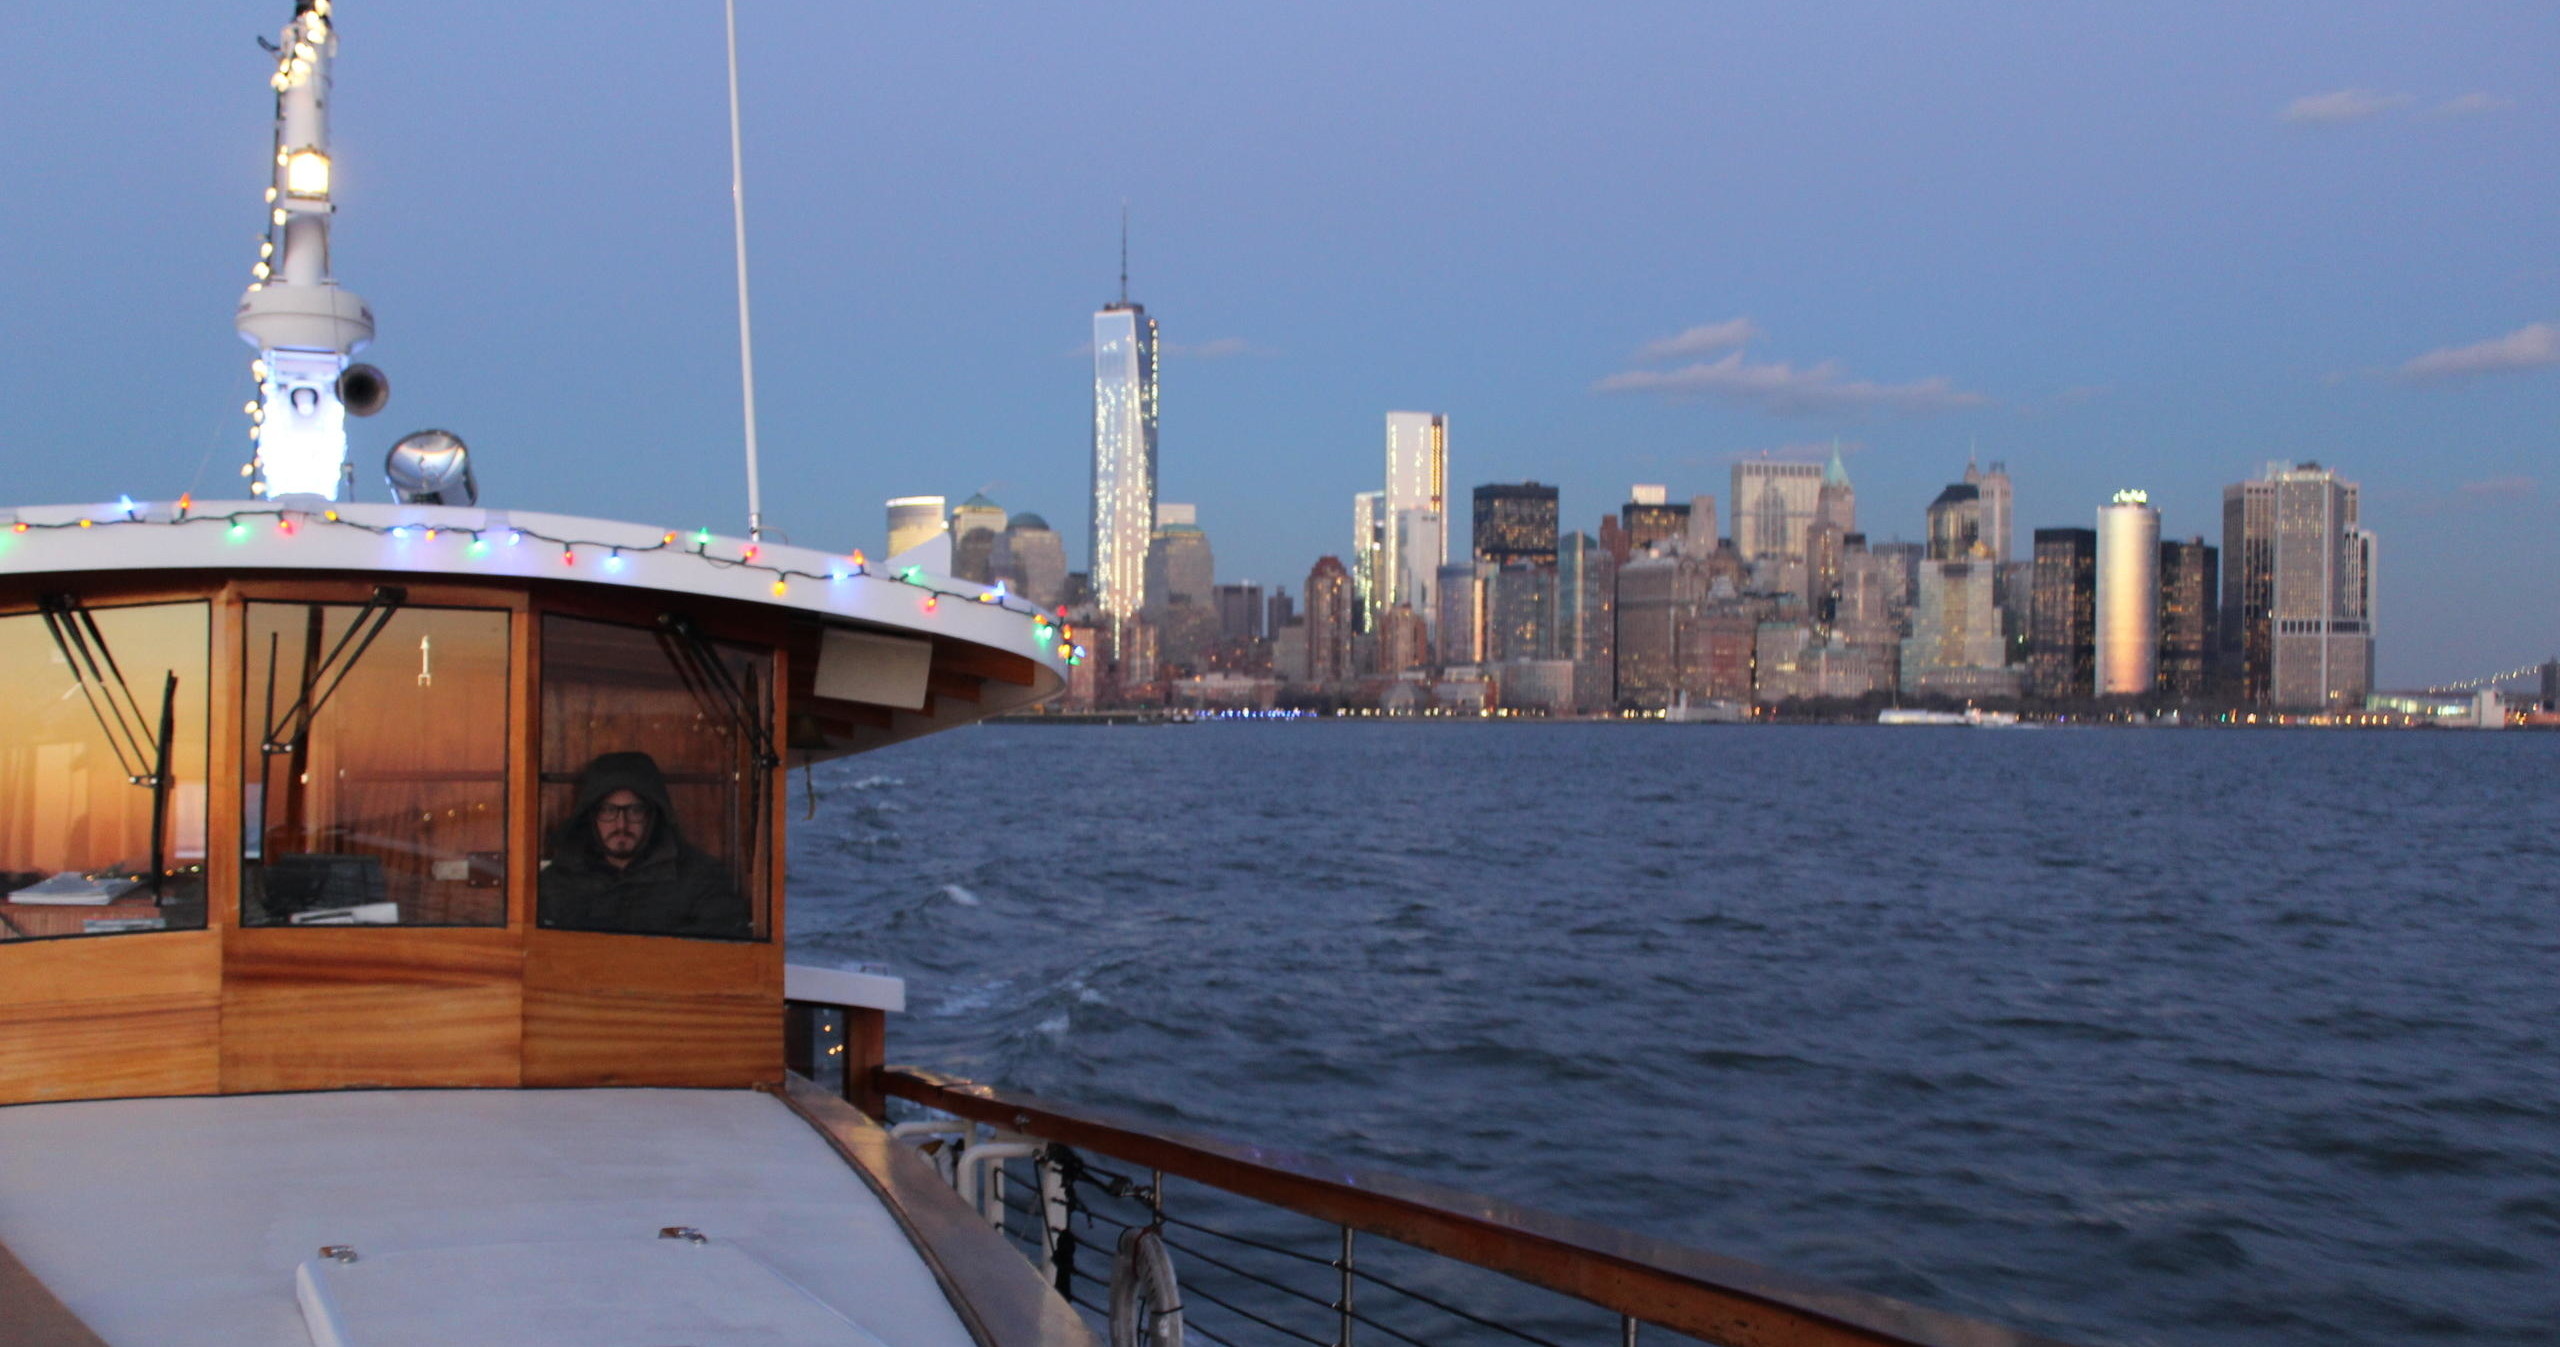 NYC Sunset Cruise With Hot Cocoa